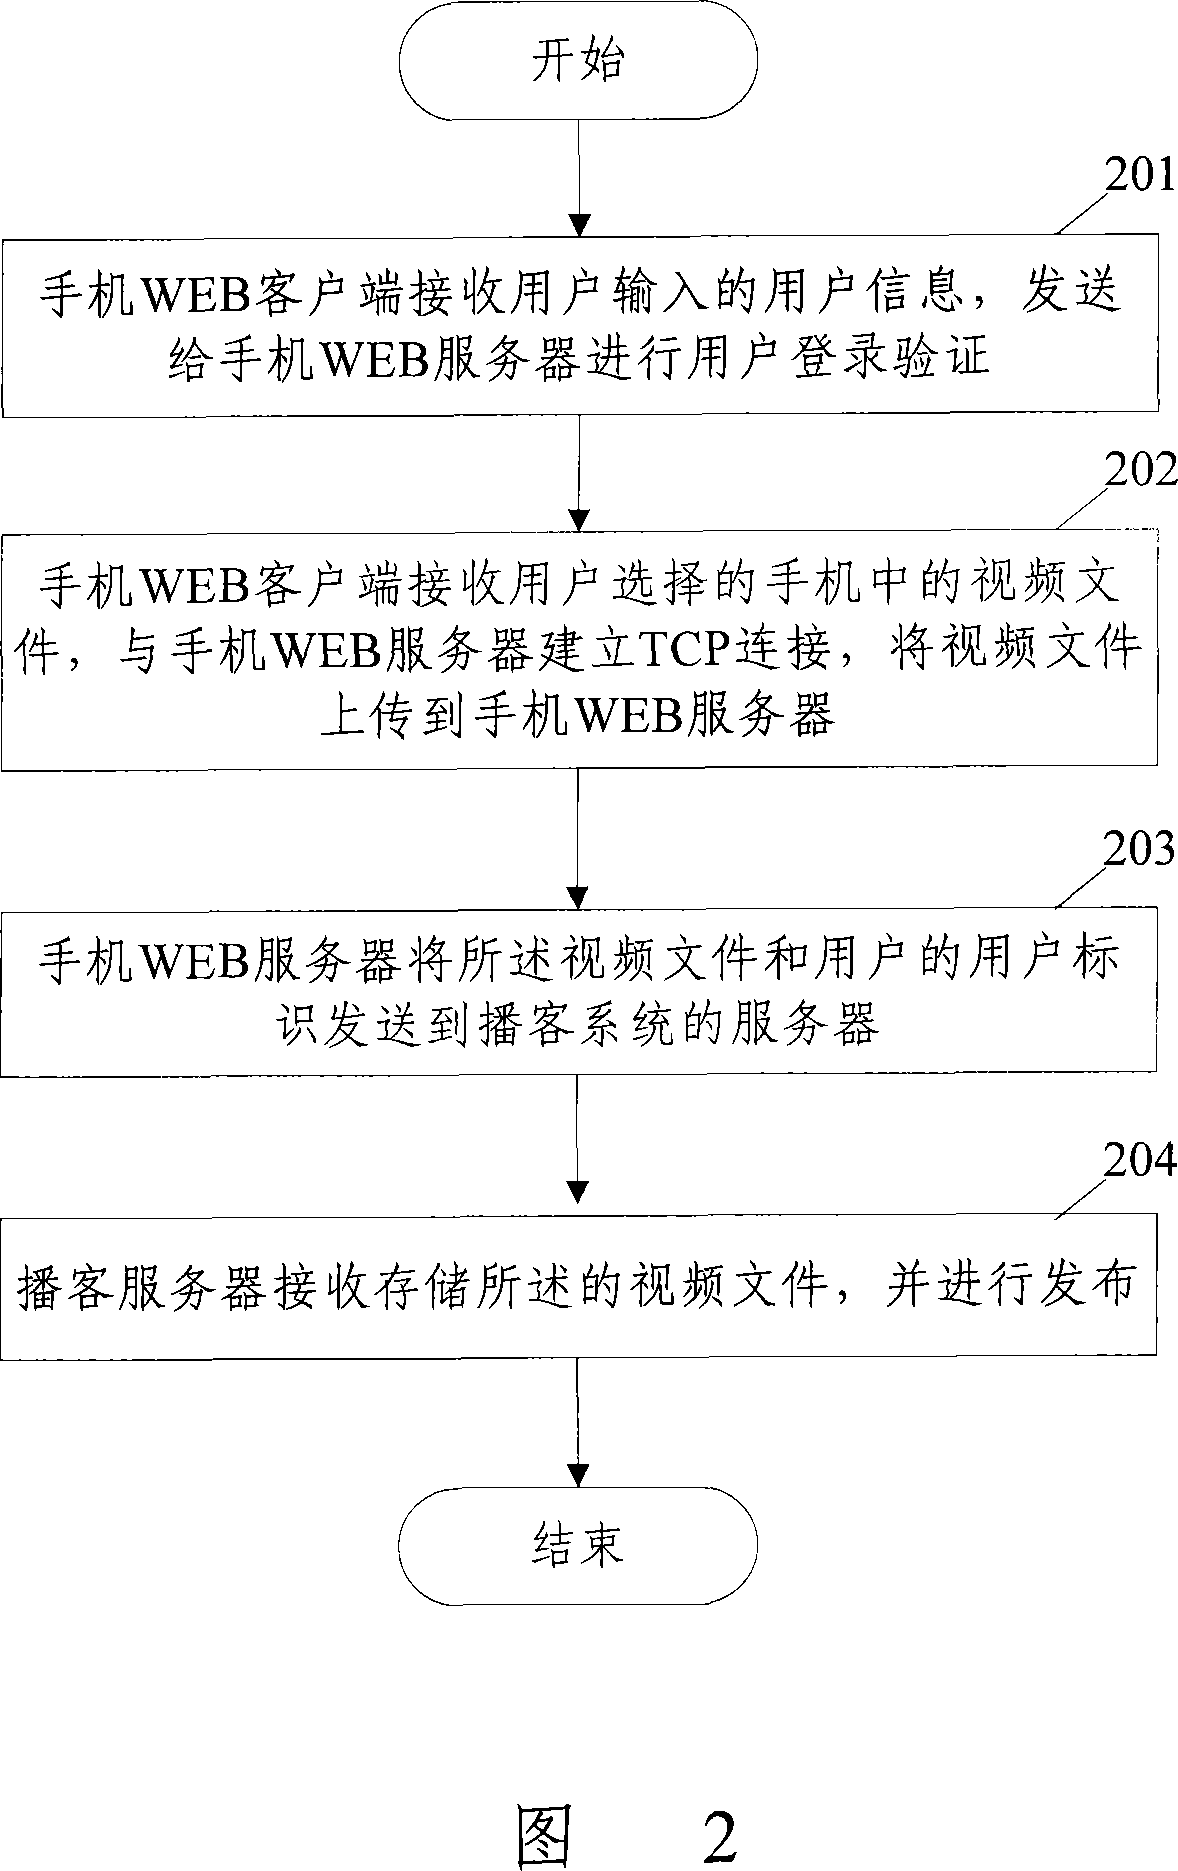 Multimedia information transmission release system and method for releasing multimedia information thereof